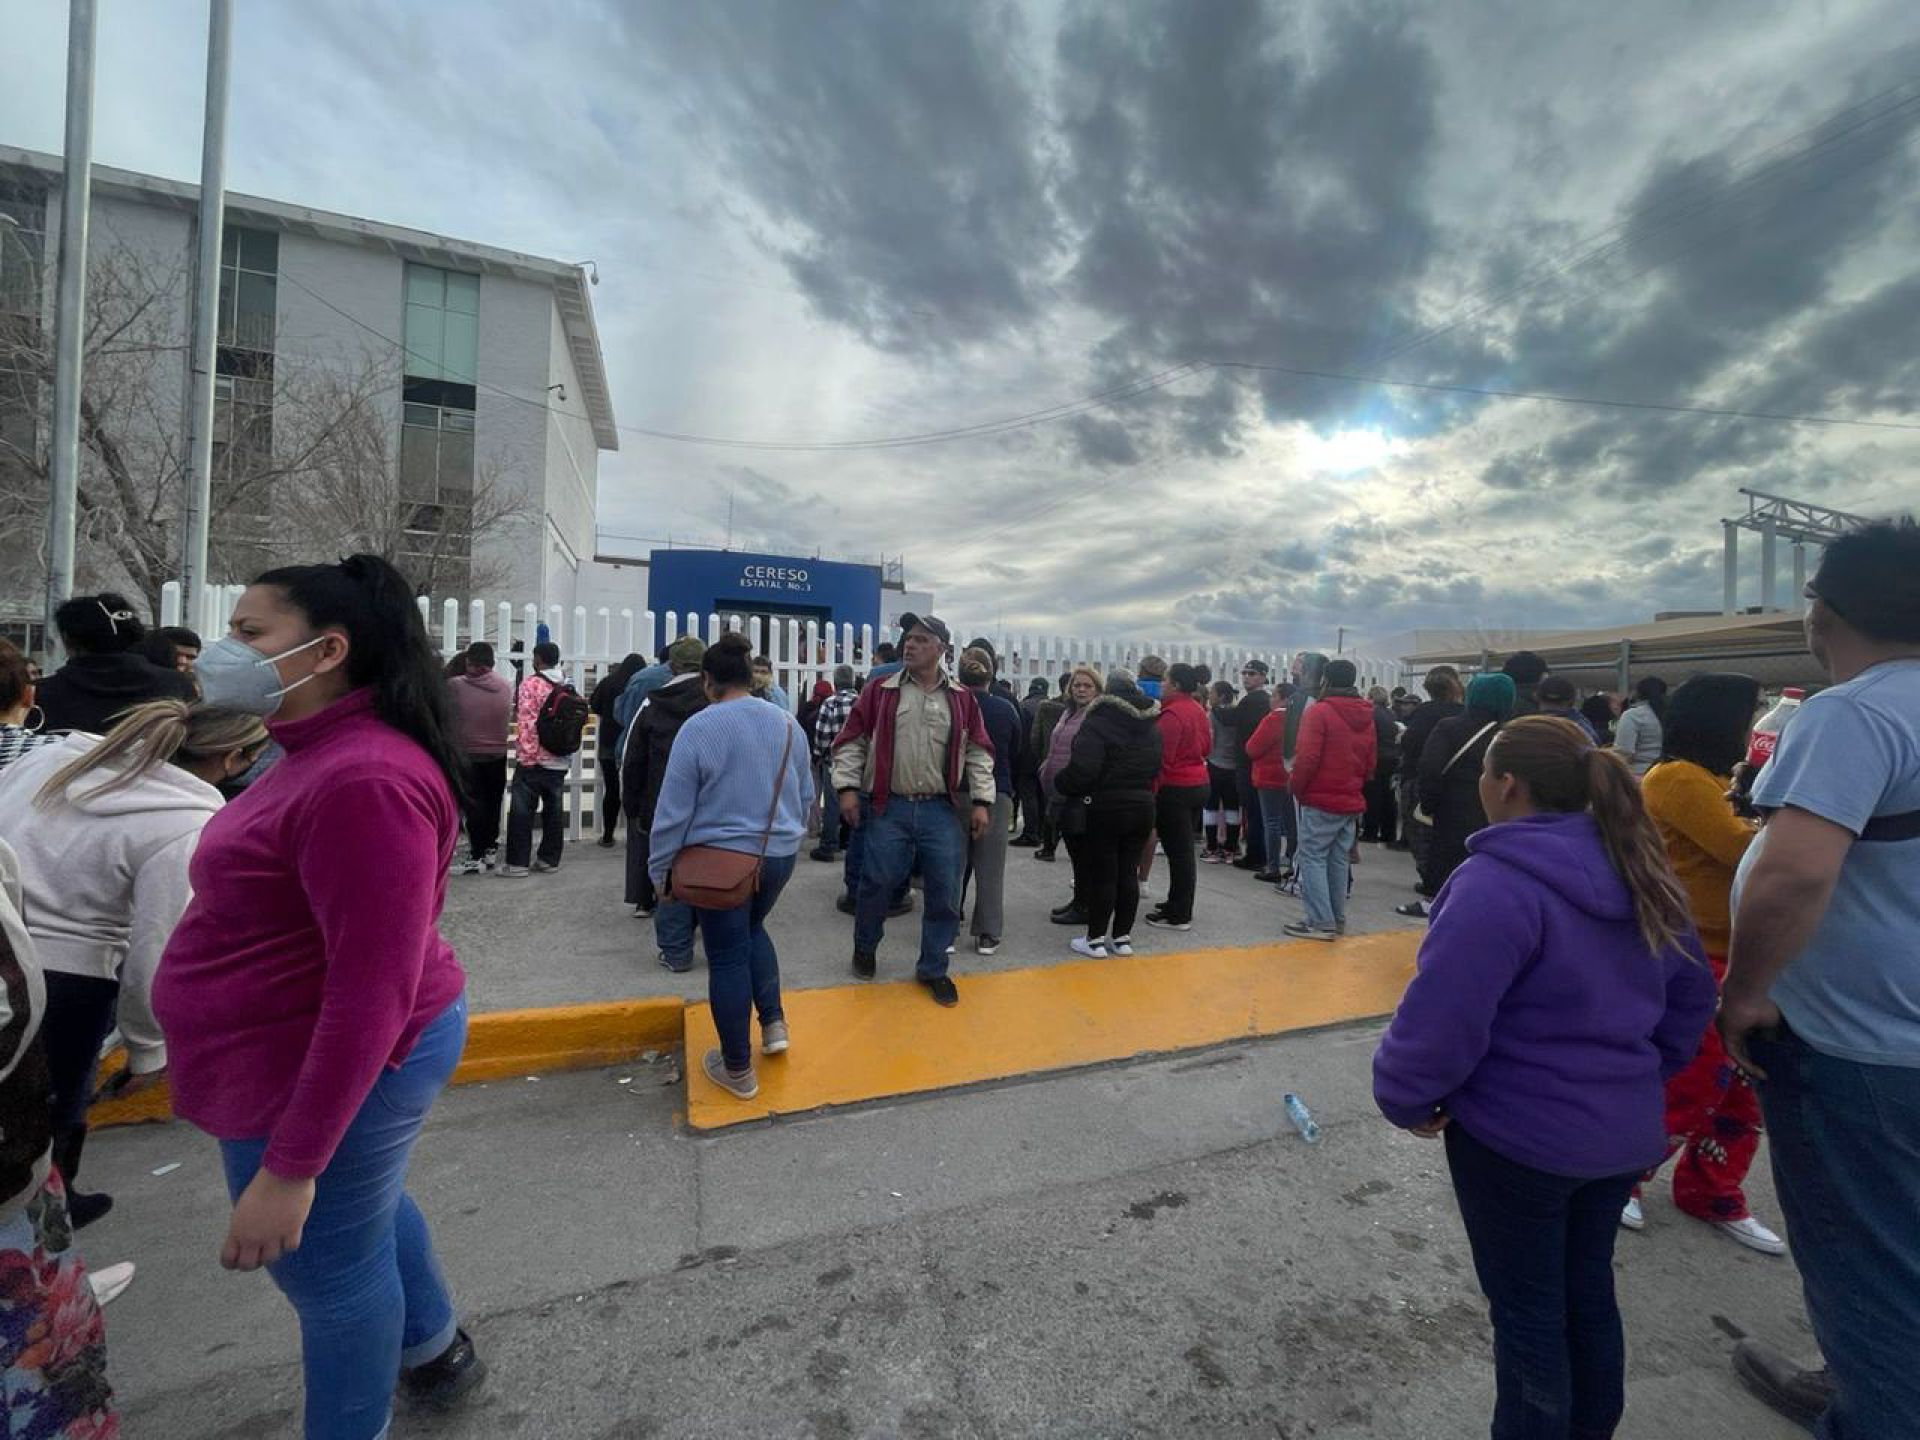 On the morning of January 1, an armed commando attacked the Ciudad Juárez Prison and sowed terror among the families during visiting hours.  (DARKROOM)